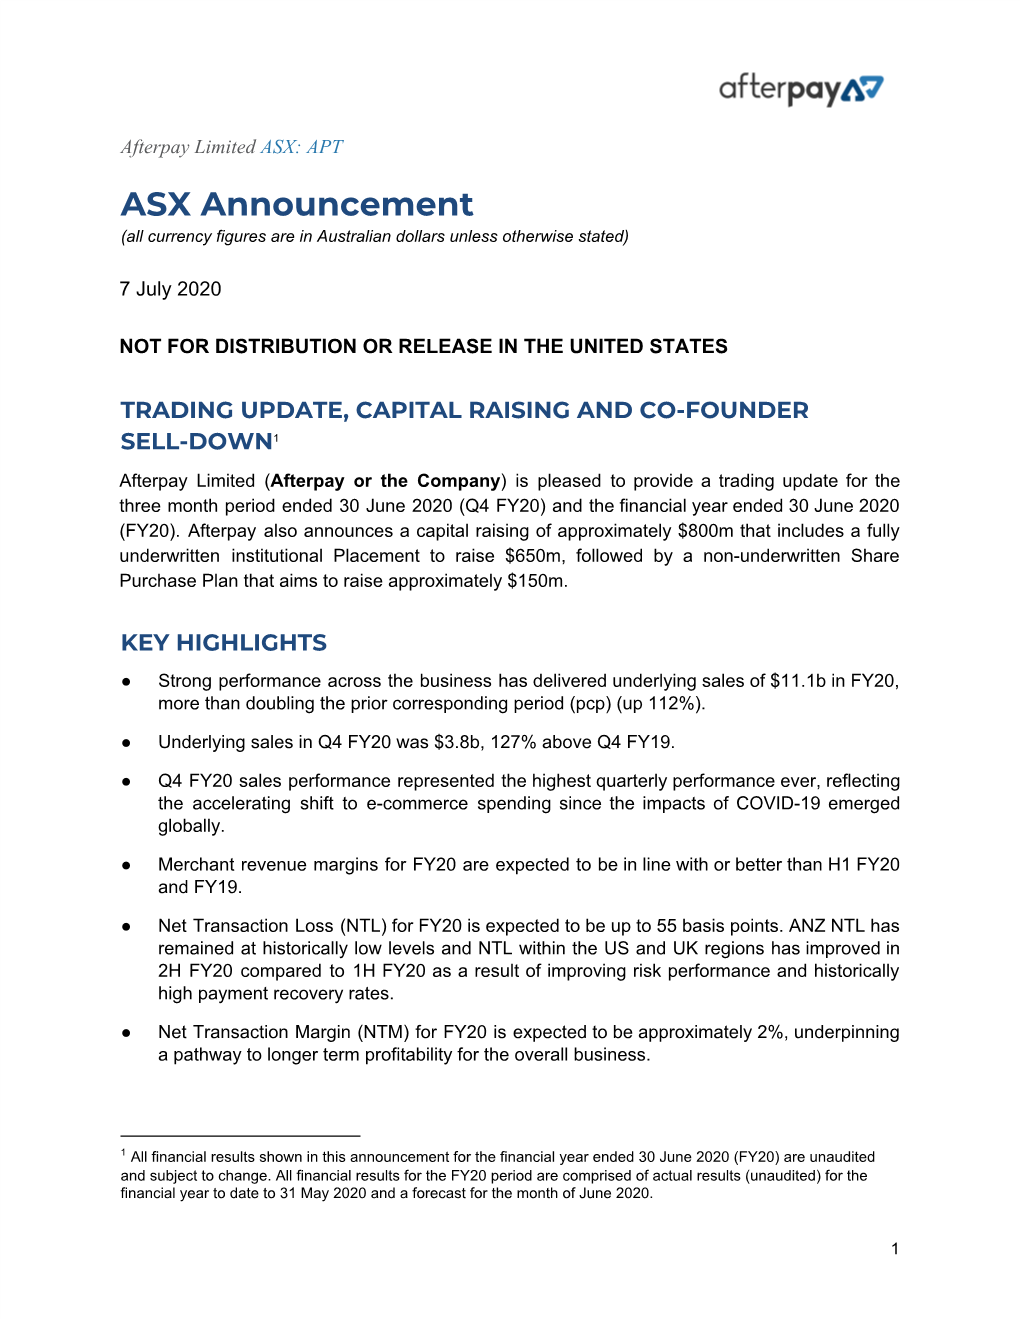 ASX Announcement (All Currency Figures Are in Australian Dollars Unless Otherwise Stated)